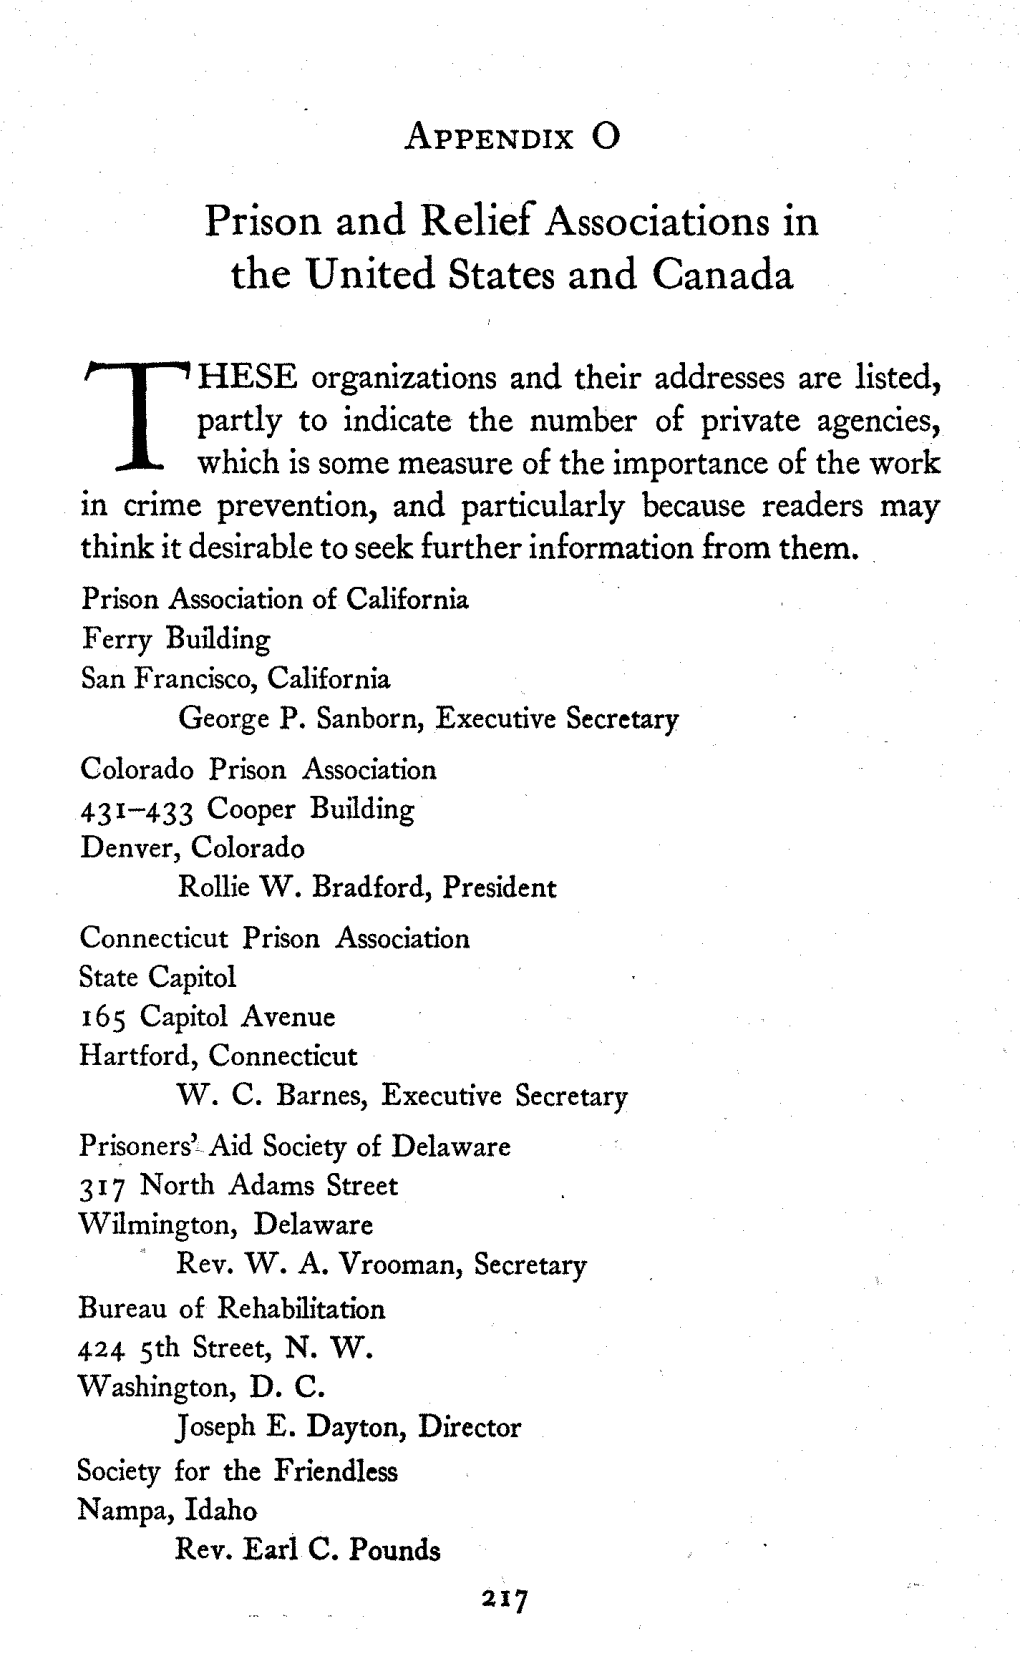 Prison and Relief Associations in the United States and Canada